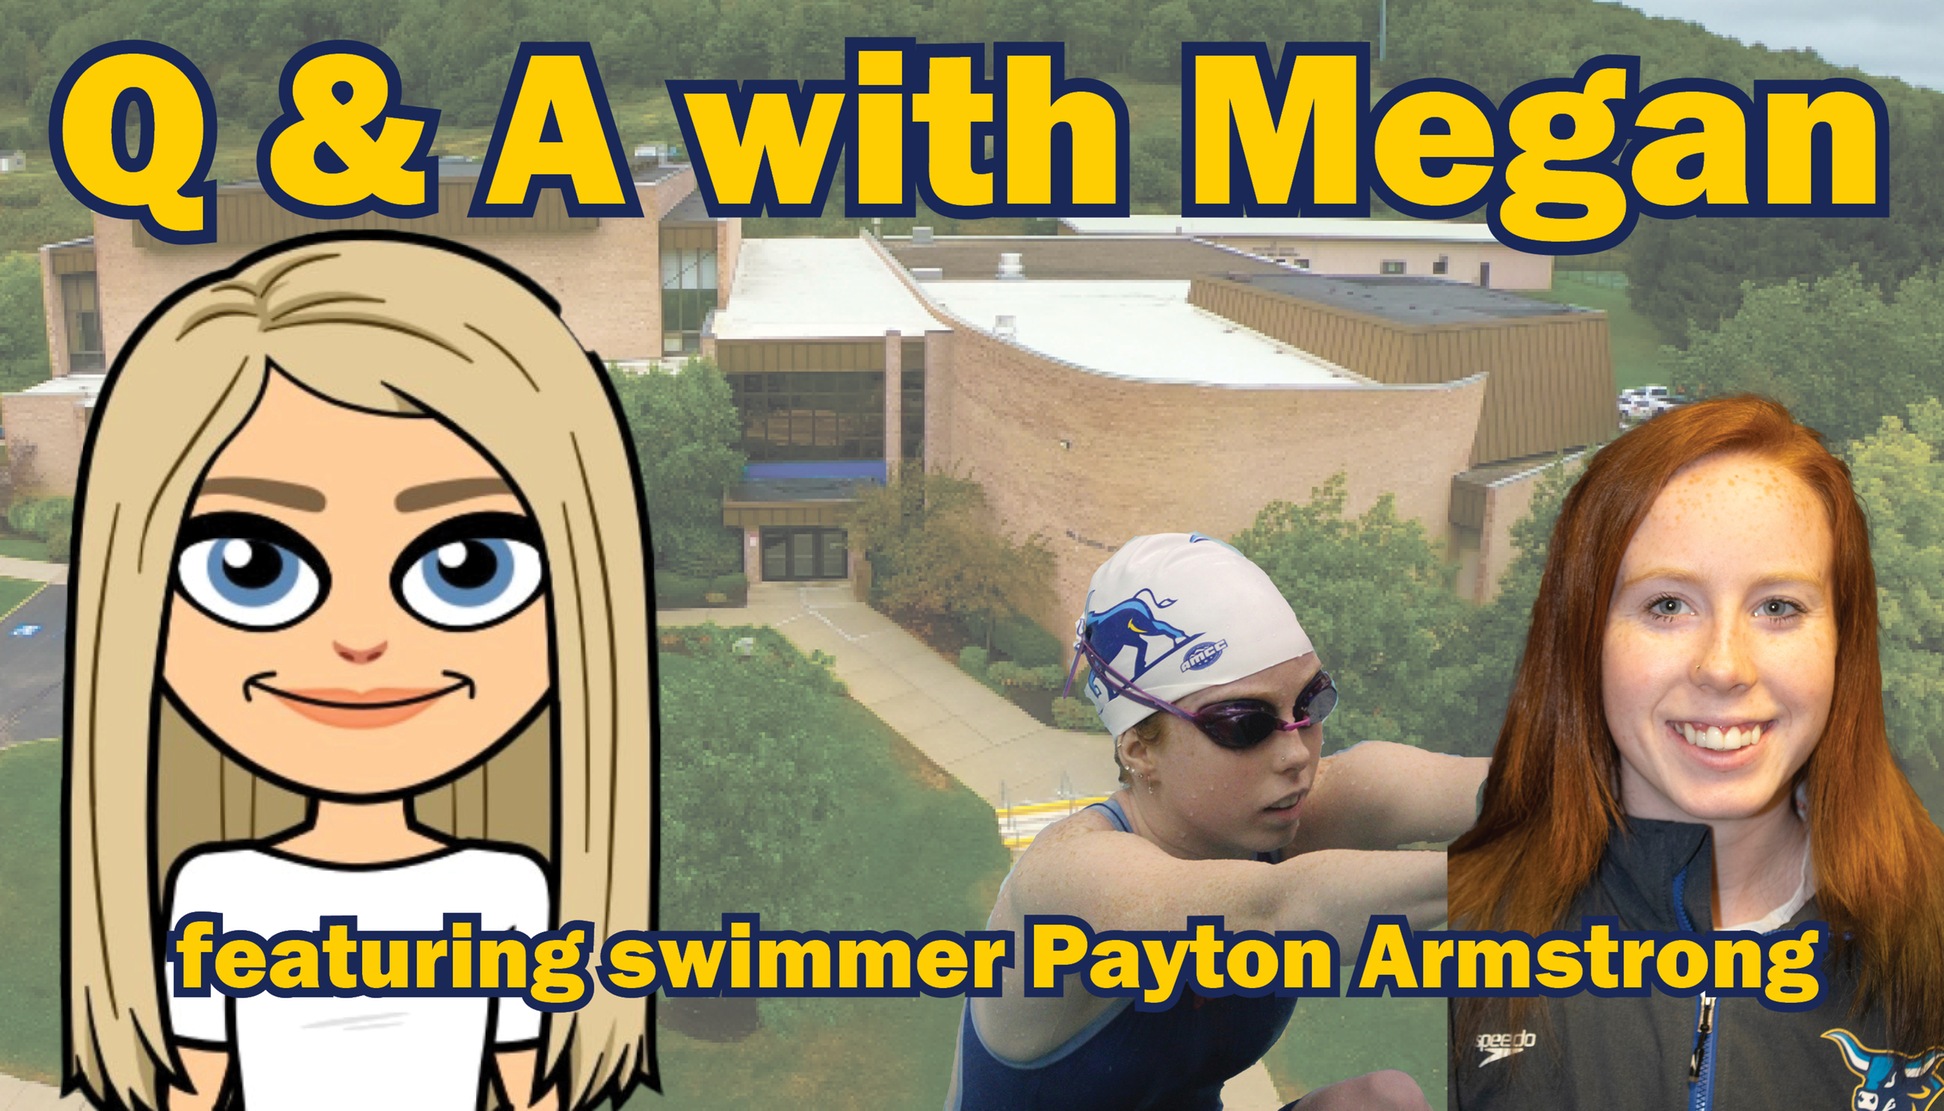 Q&A with Megan - featuring Payton Armstrong.
Pictured is Payton Armstrong in a headshot and ready to come off the block in the backstroke.